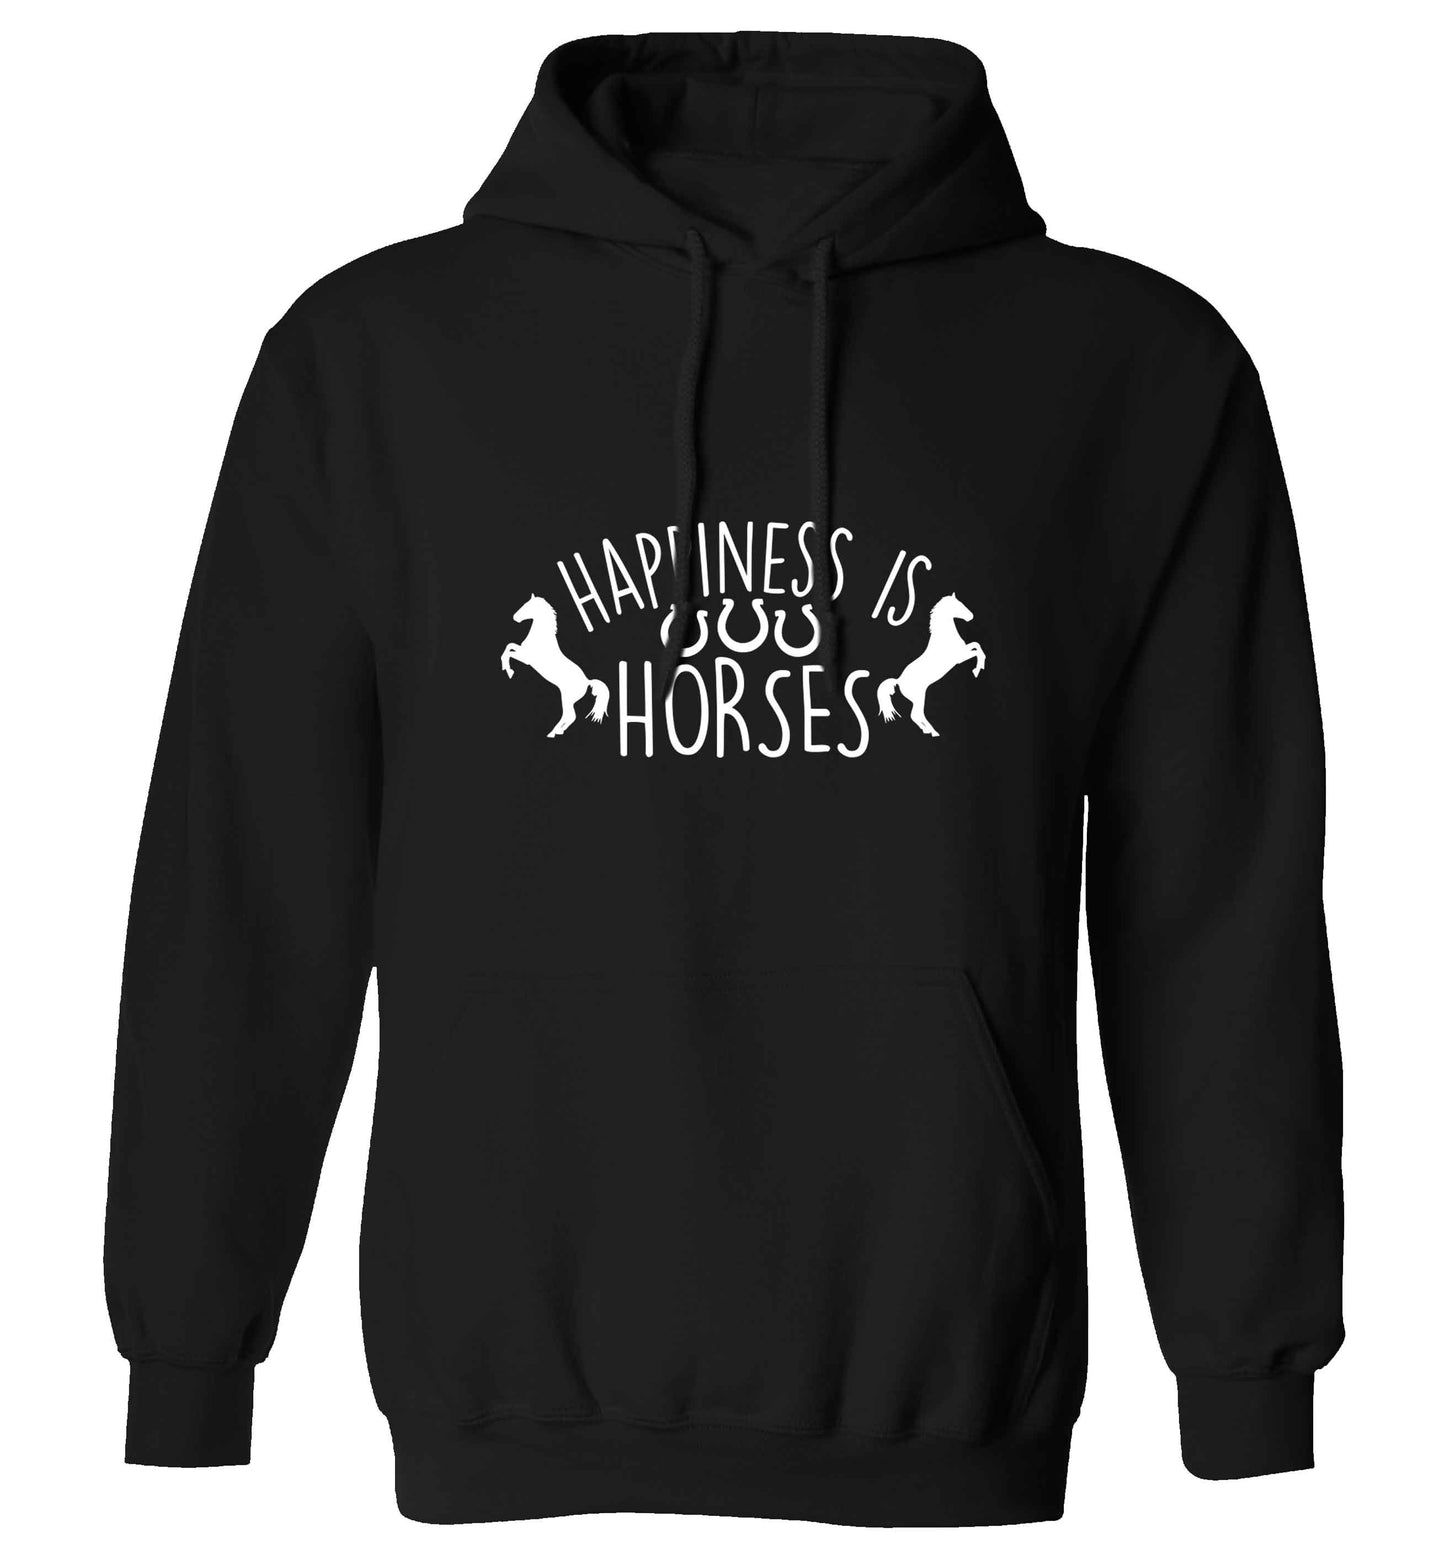 Happiness is horses adults unisex black hoodie 2XL